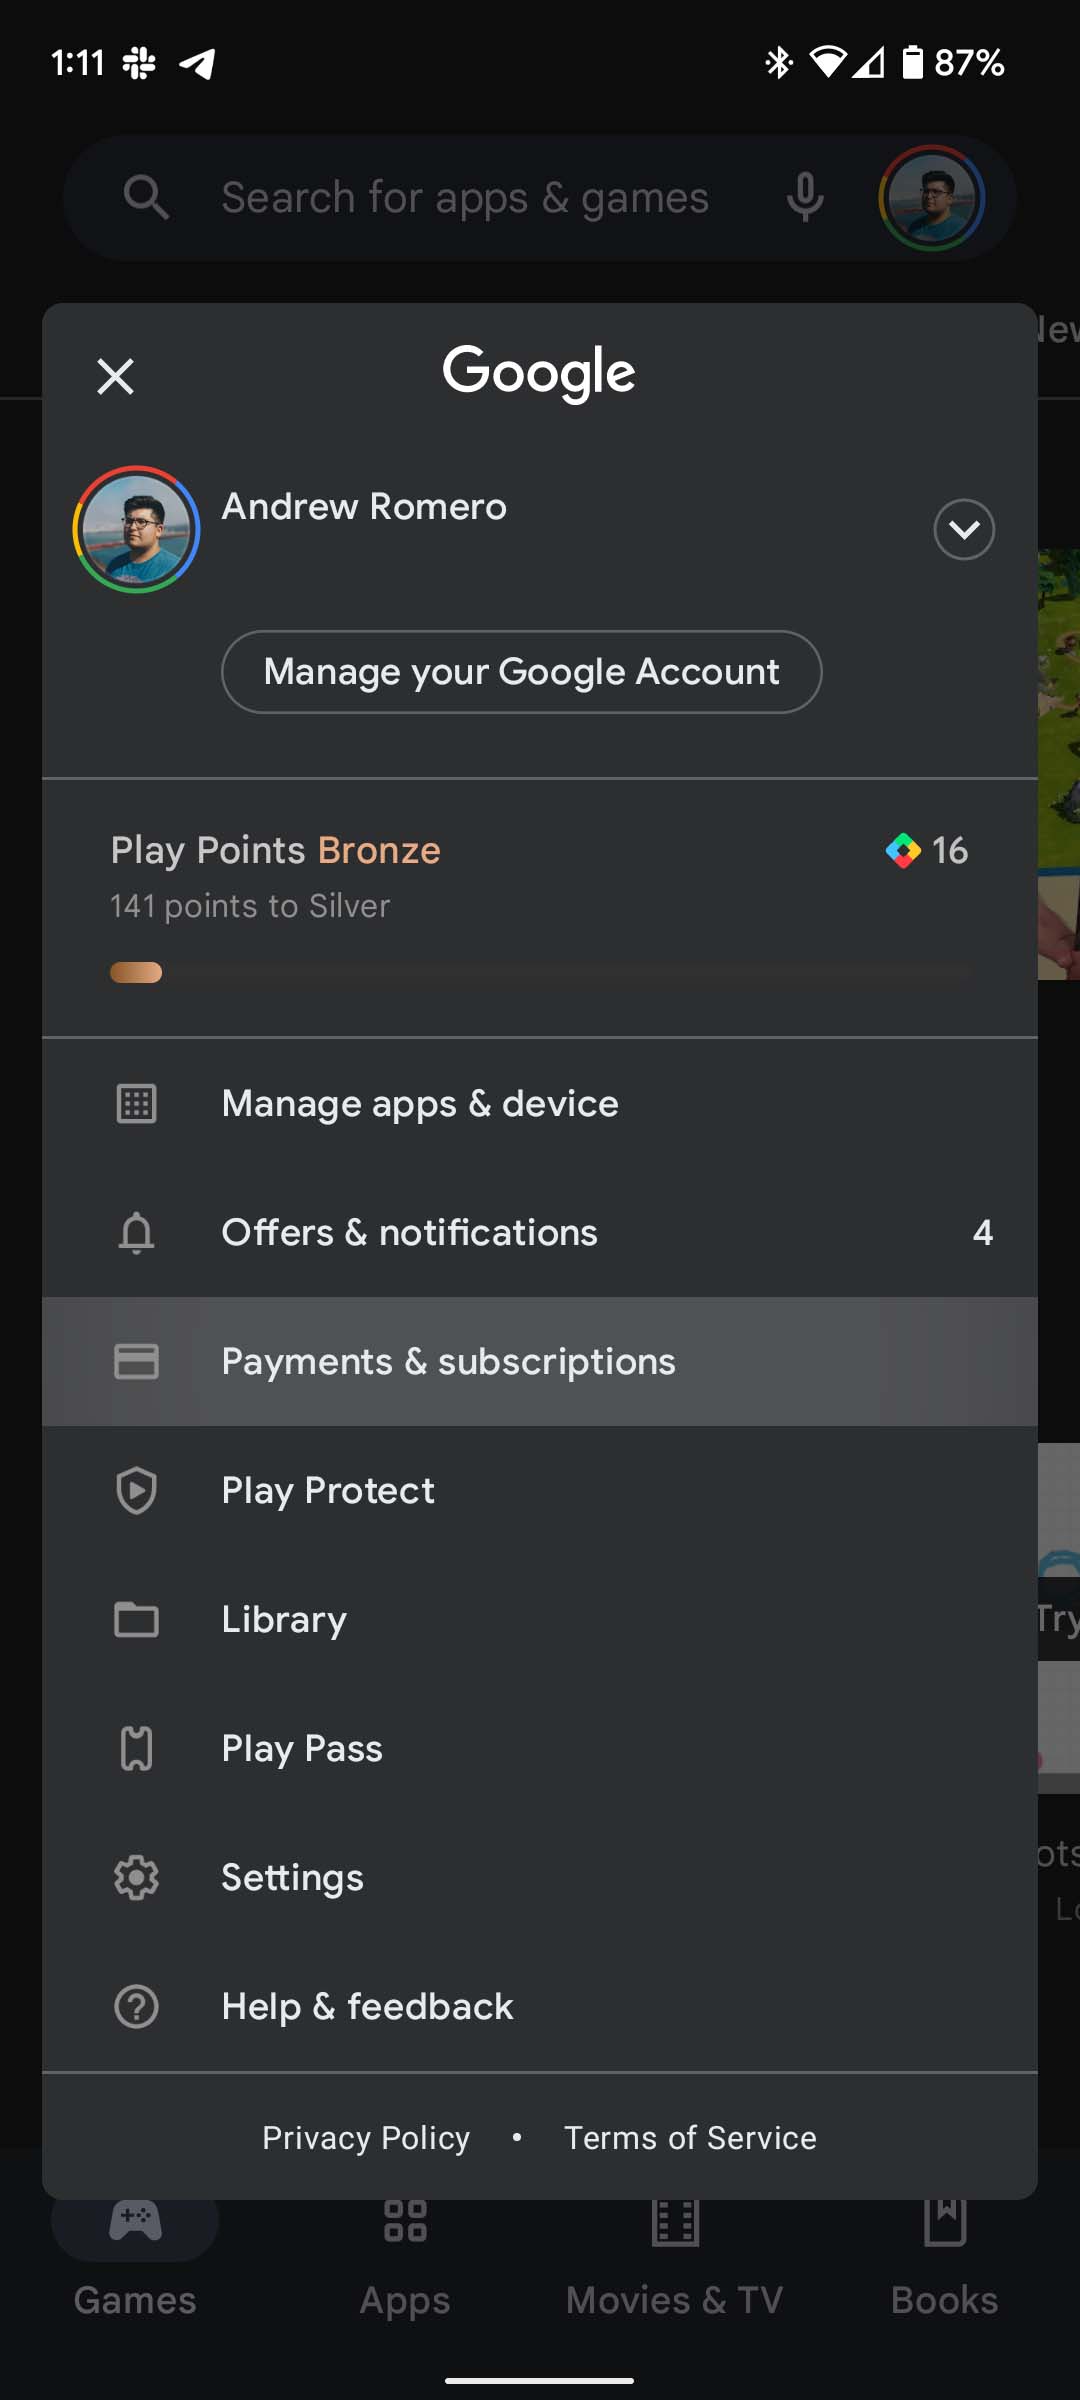 How To Upload An App To Google Play Store For Free